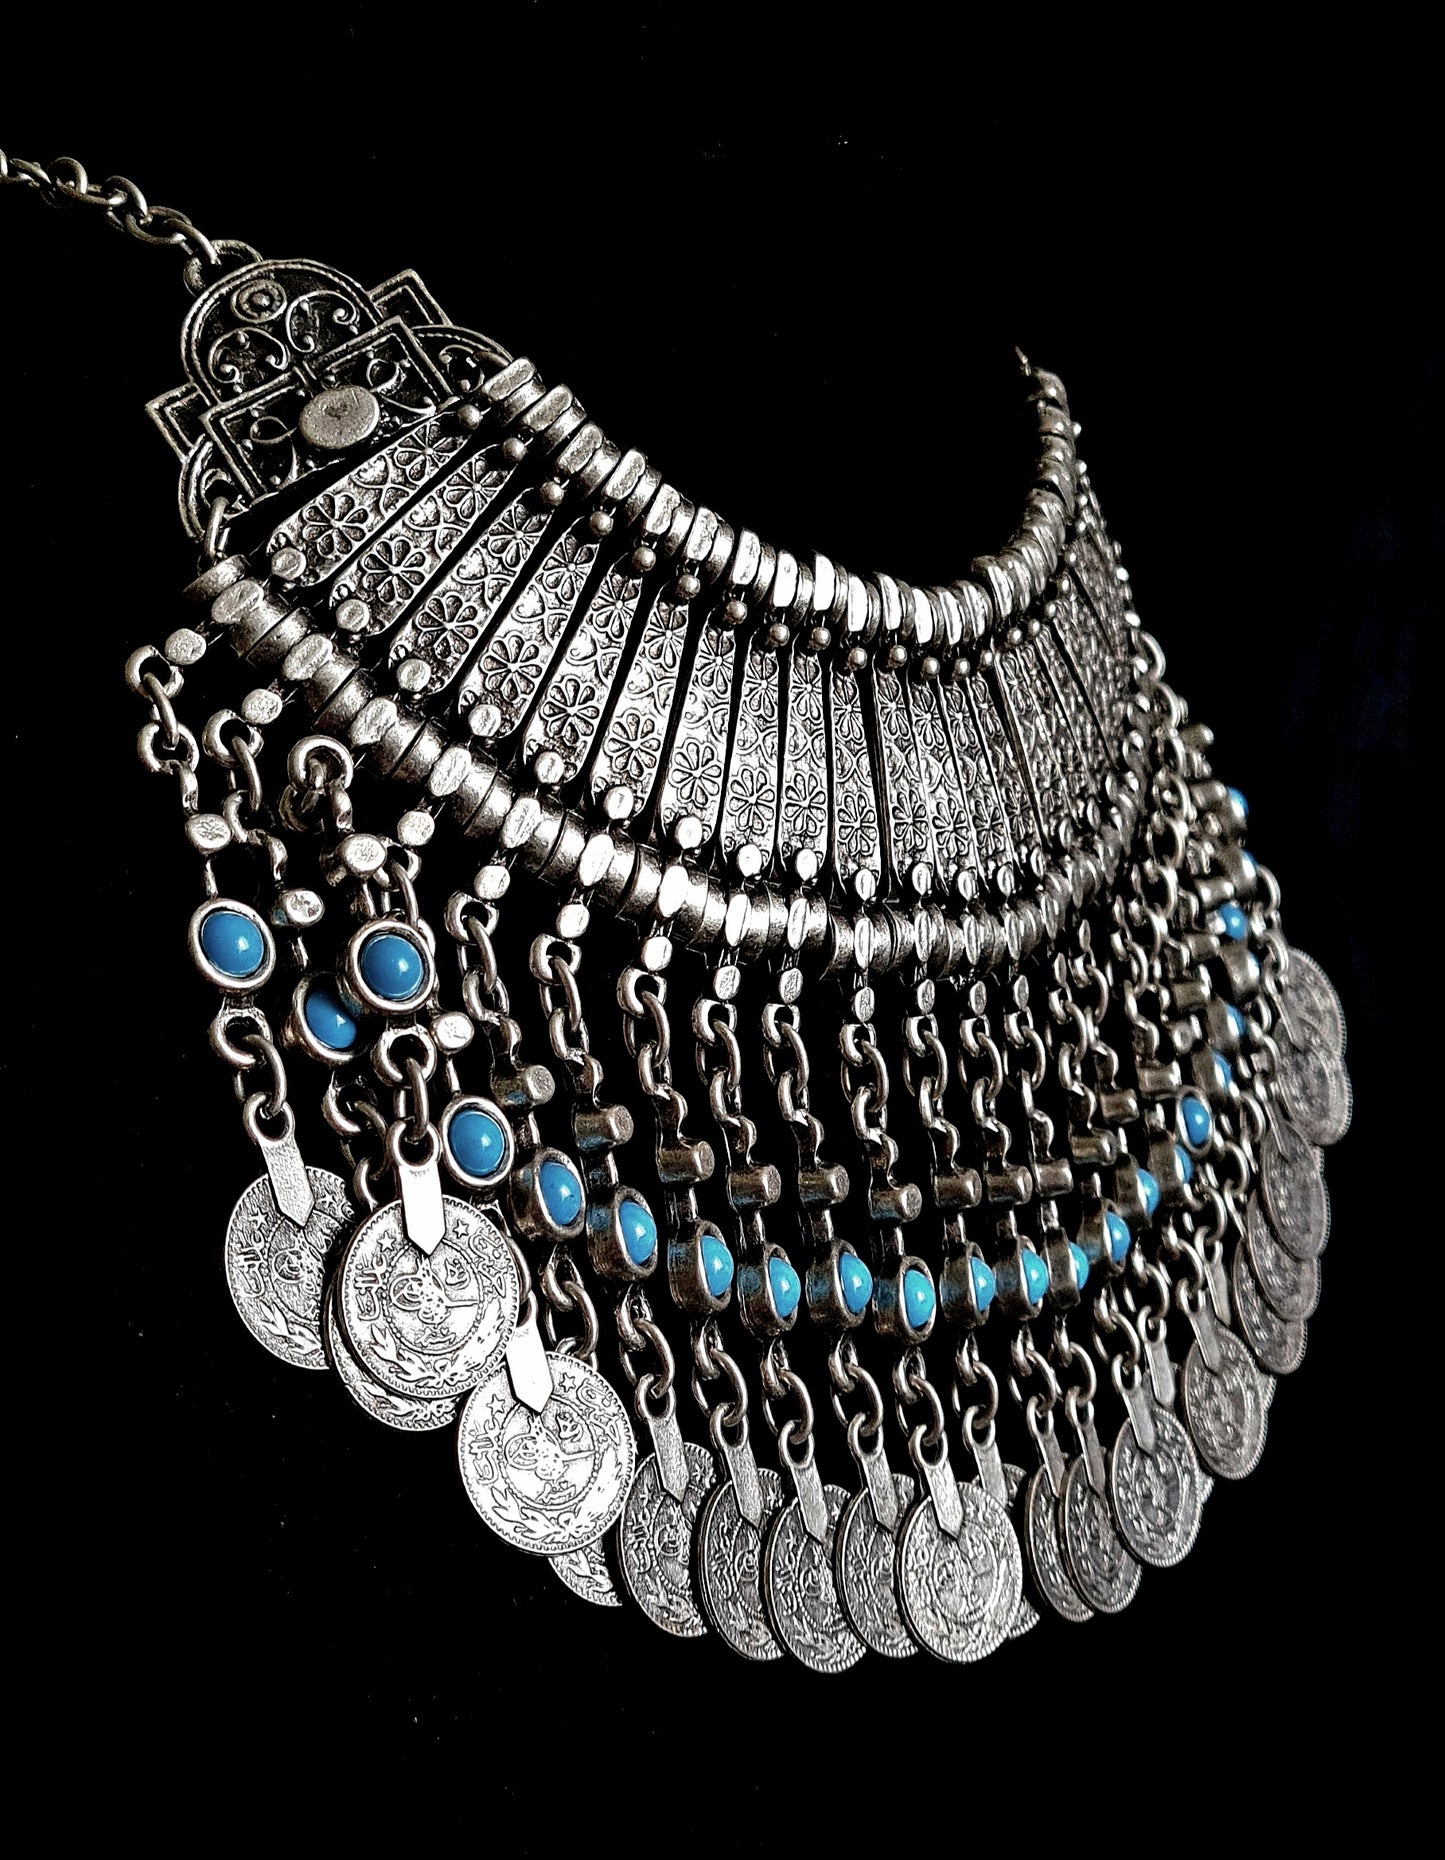 side view of A silver necklace with turquoise beads and coins on a black background. The necklace is made of silver and has a delicate design. The turquoise beads are small and round, and they have a bright blue color. The coins are also small and round, and they have a bronze color. The necklace is long and hangs down to the chest.